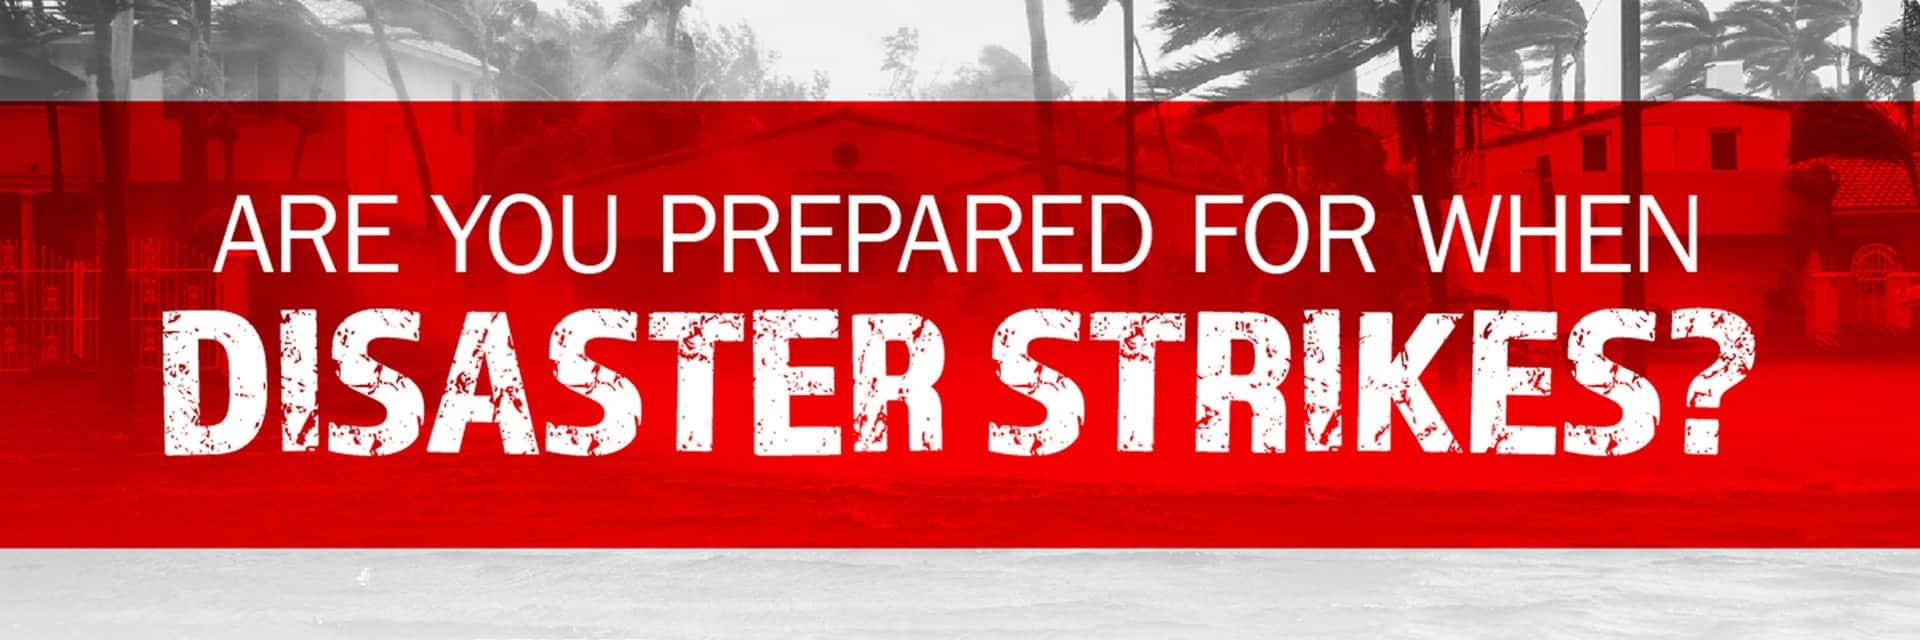 Are you prepared when disaster strikes?